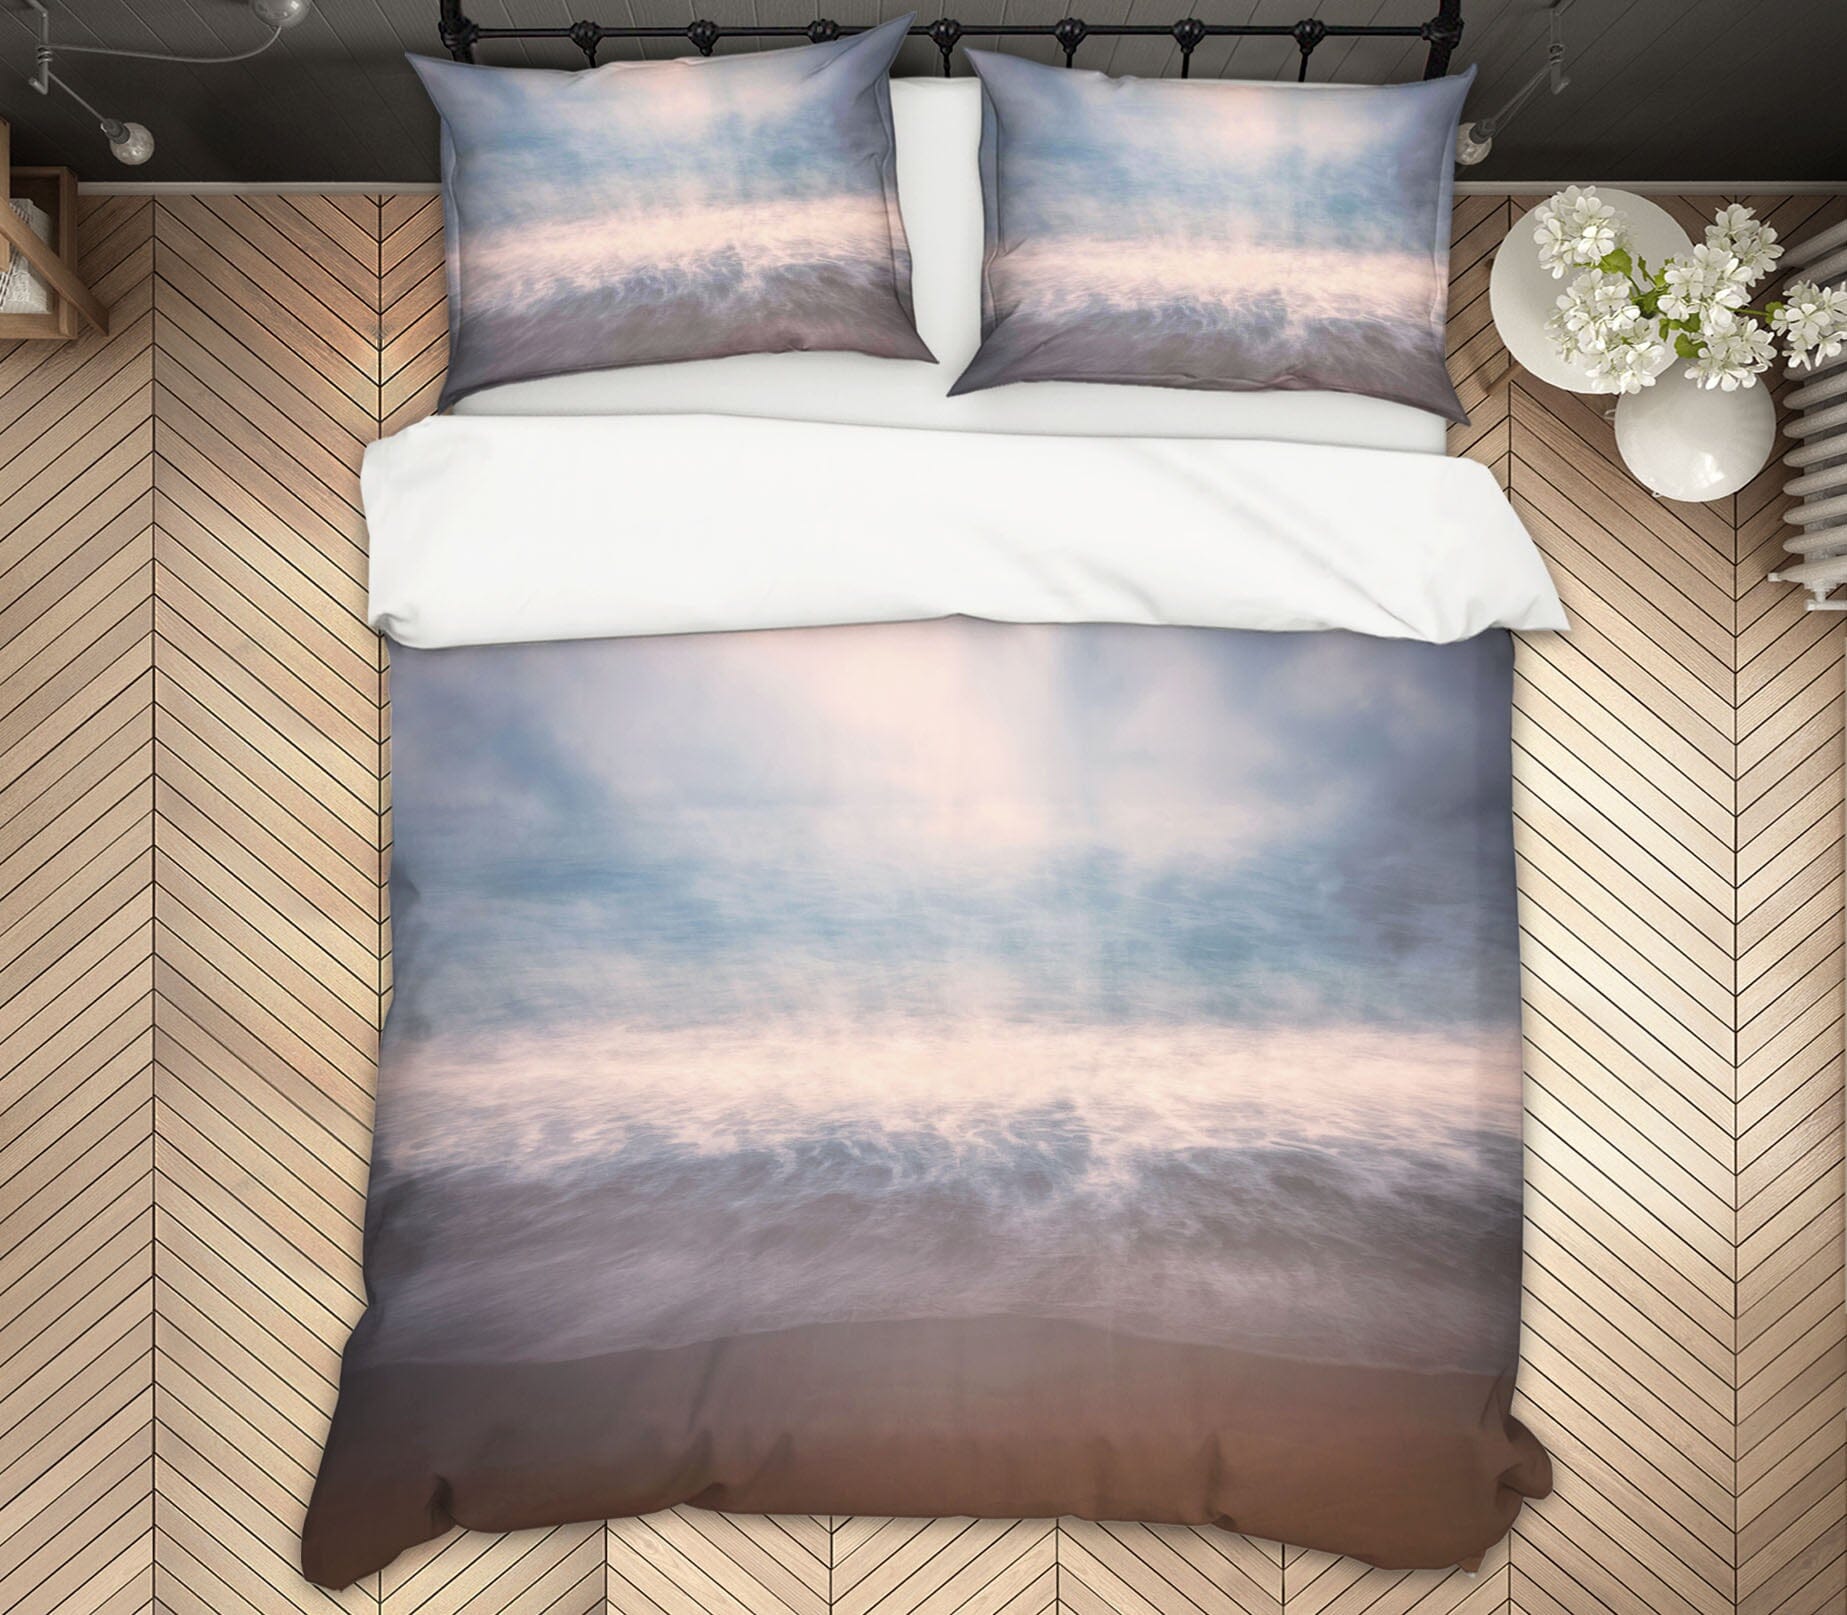 3D Stormy Waves 2150 Marco Carmassi Bedding Bed Pillowcases Quilt Quiet Covers AJ Creativity Home 